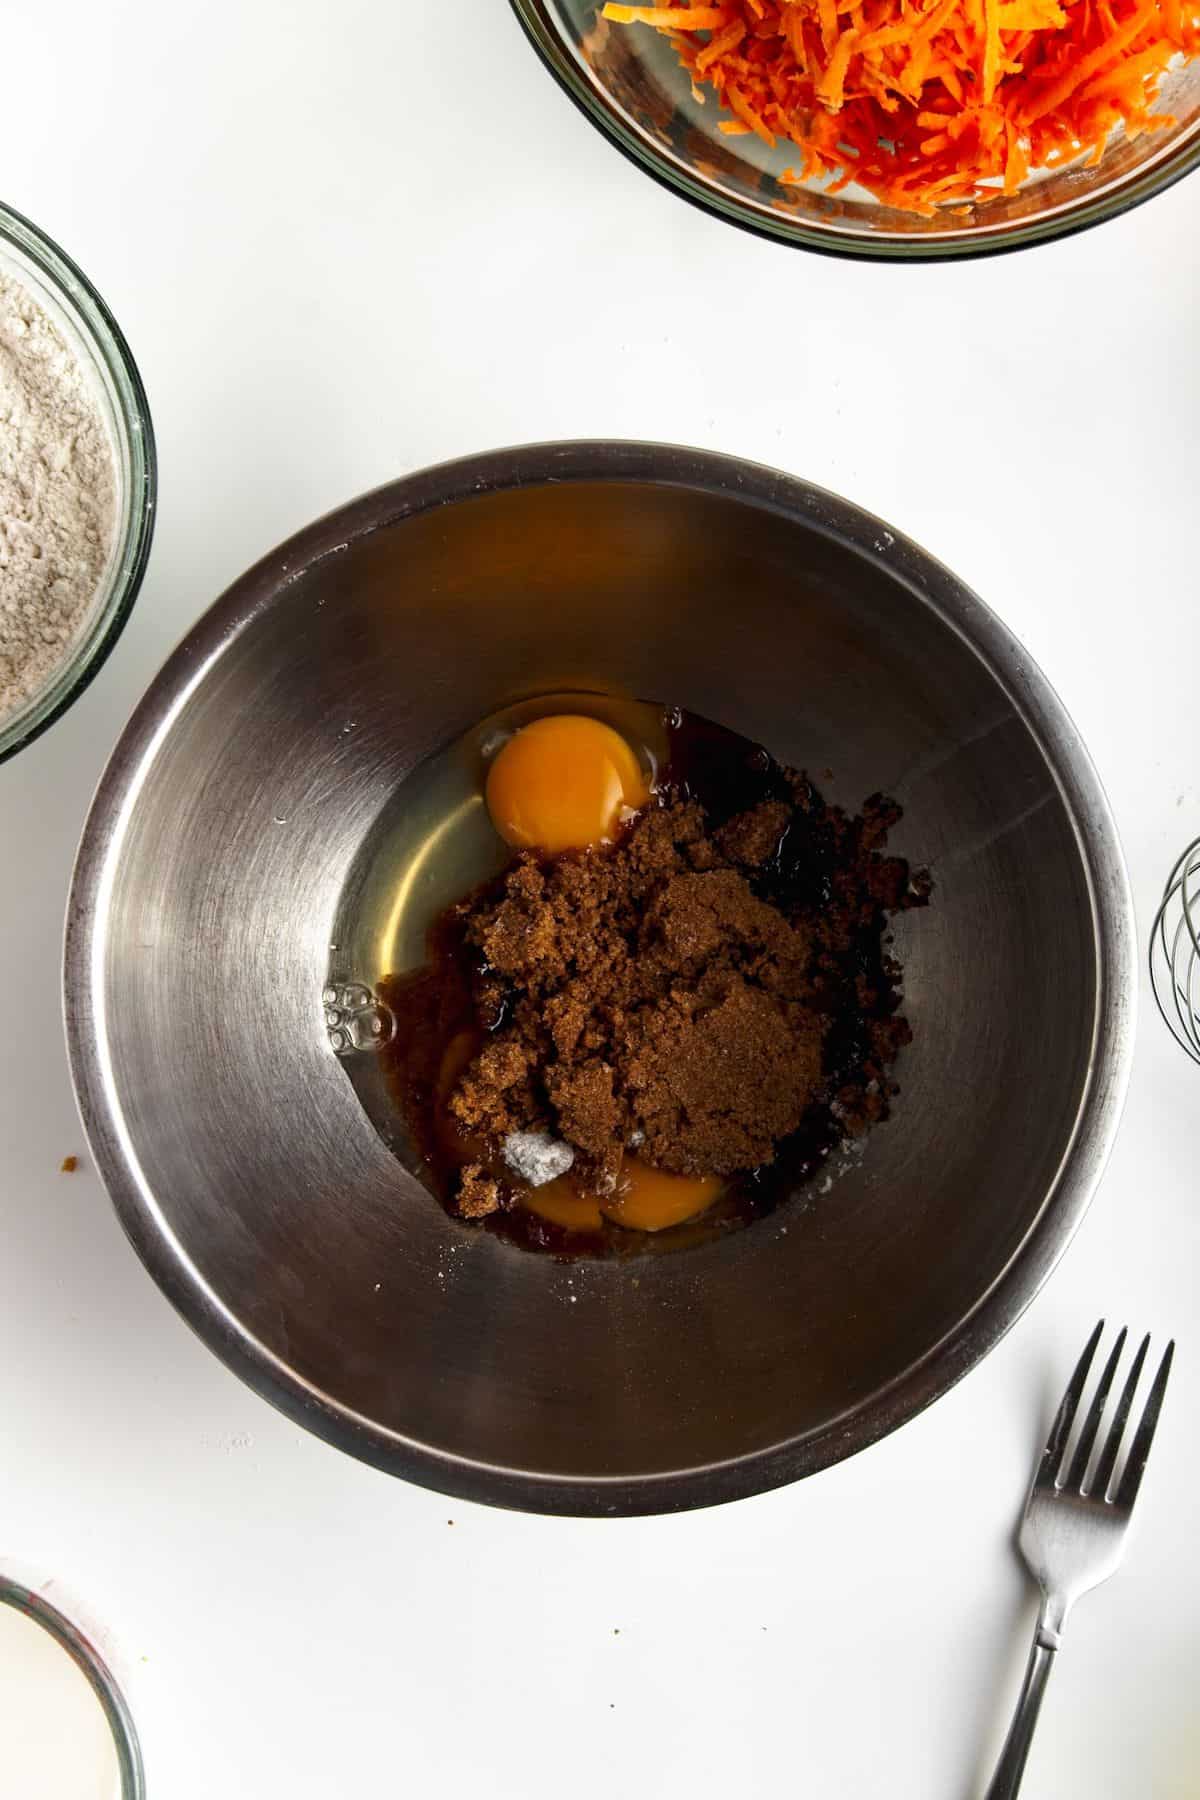 Eggs and brown sugar in a stainless bowl.